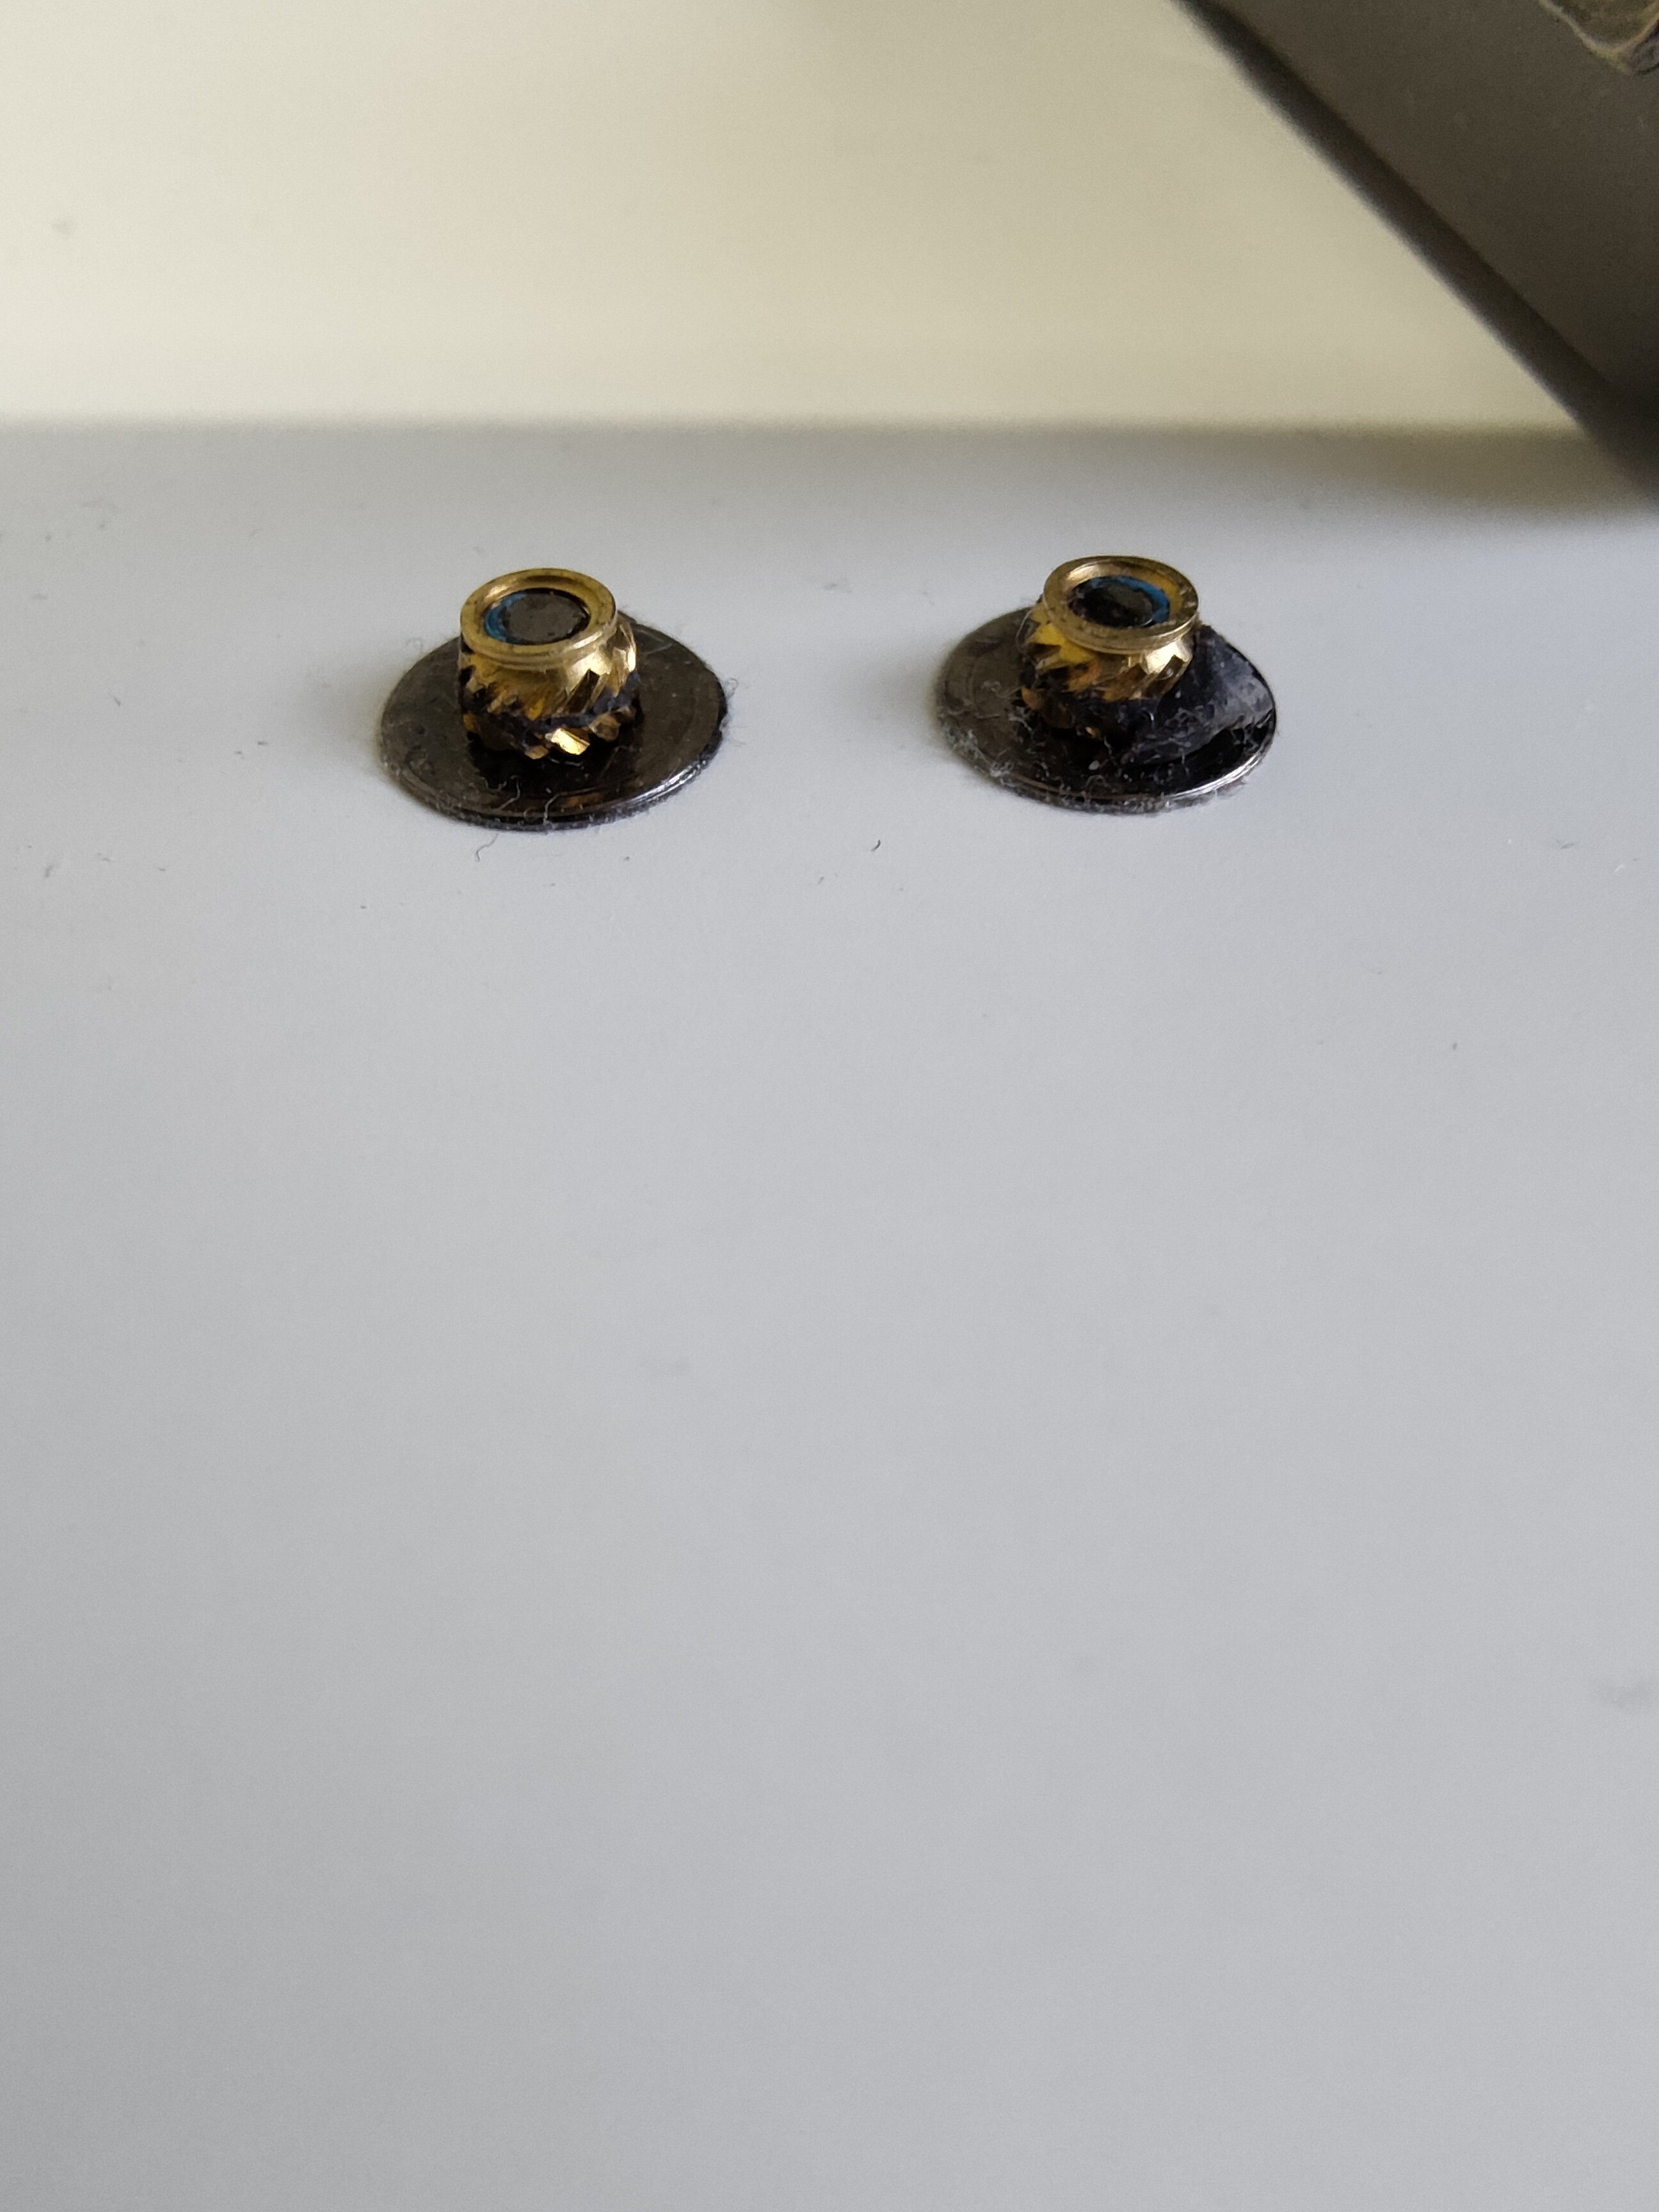 Plastic beads fall from my Envy hinge - HP Support Community - 6102474